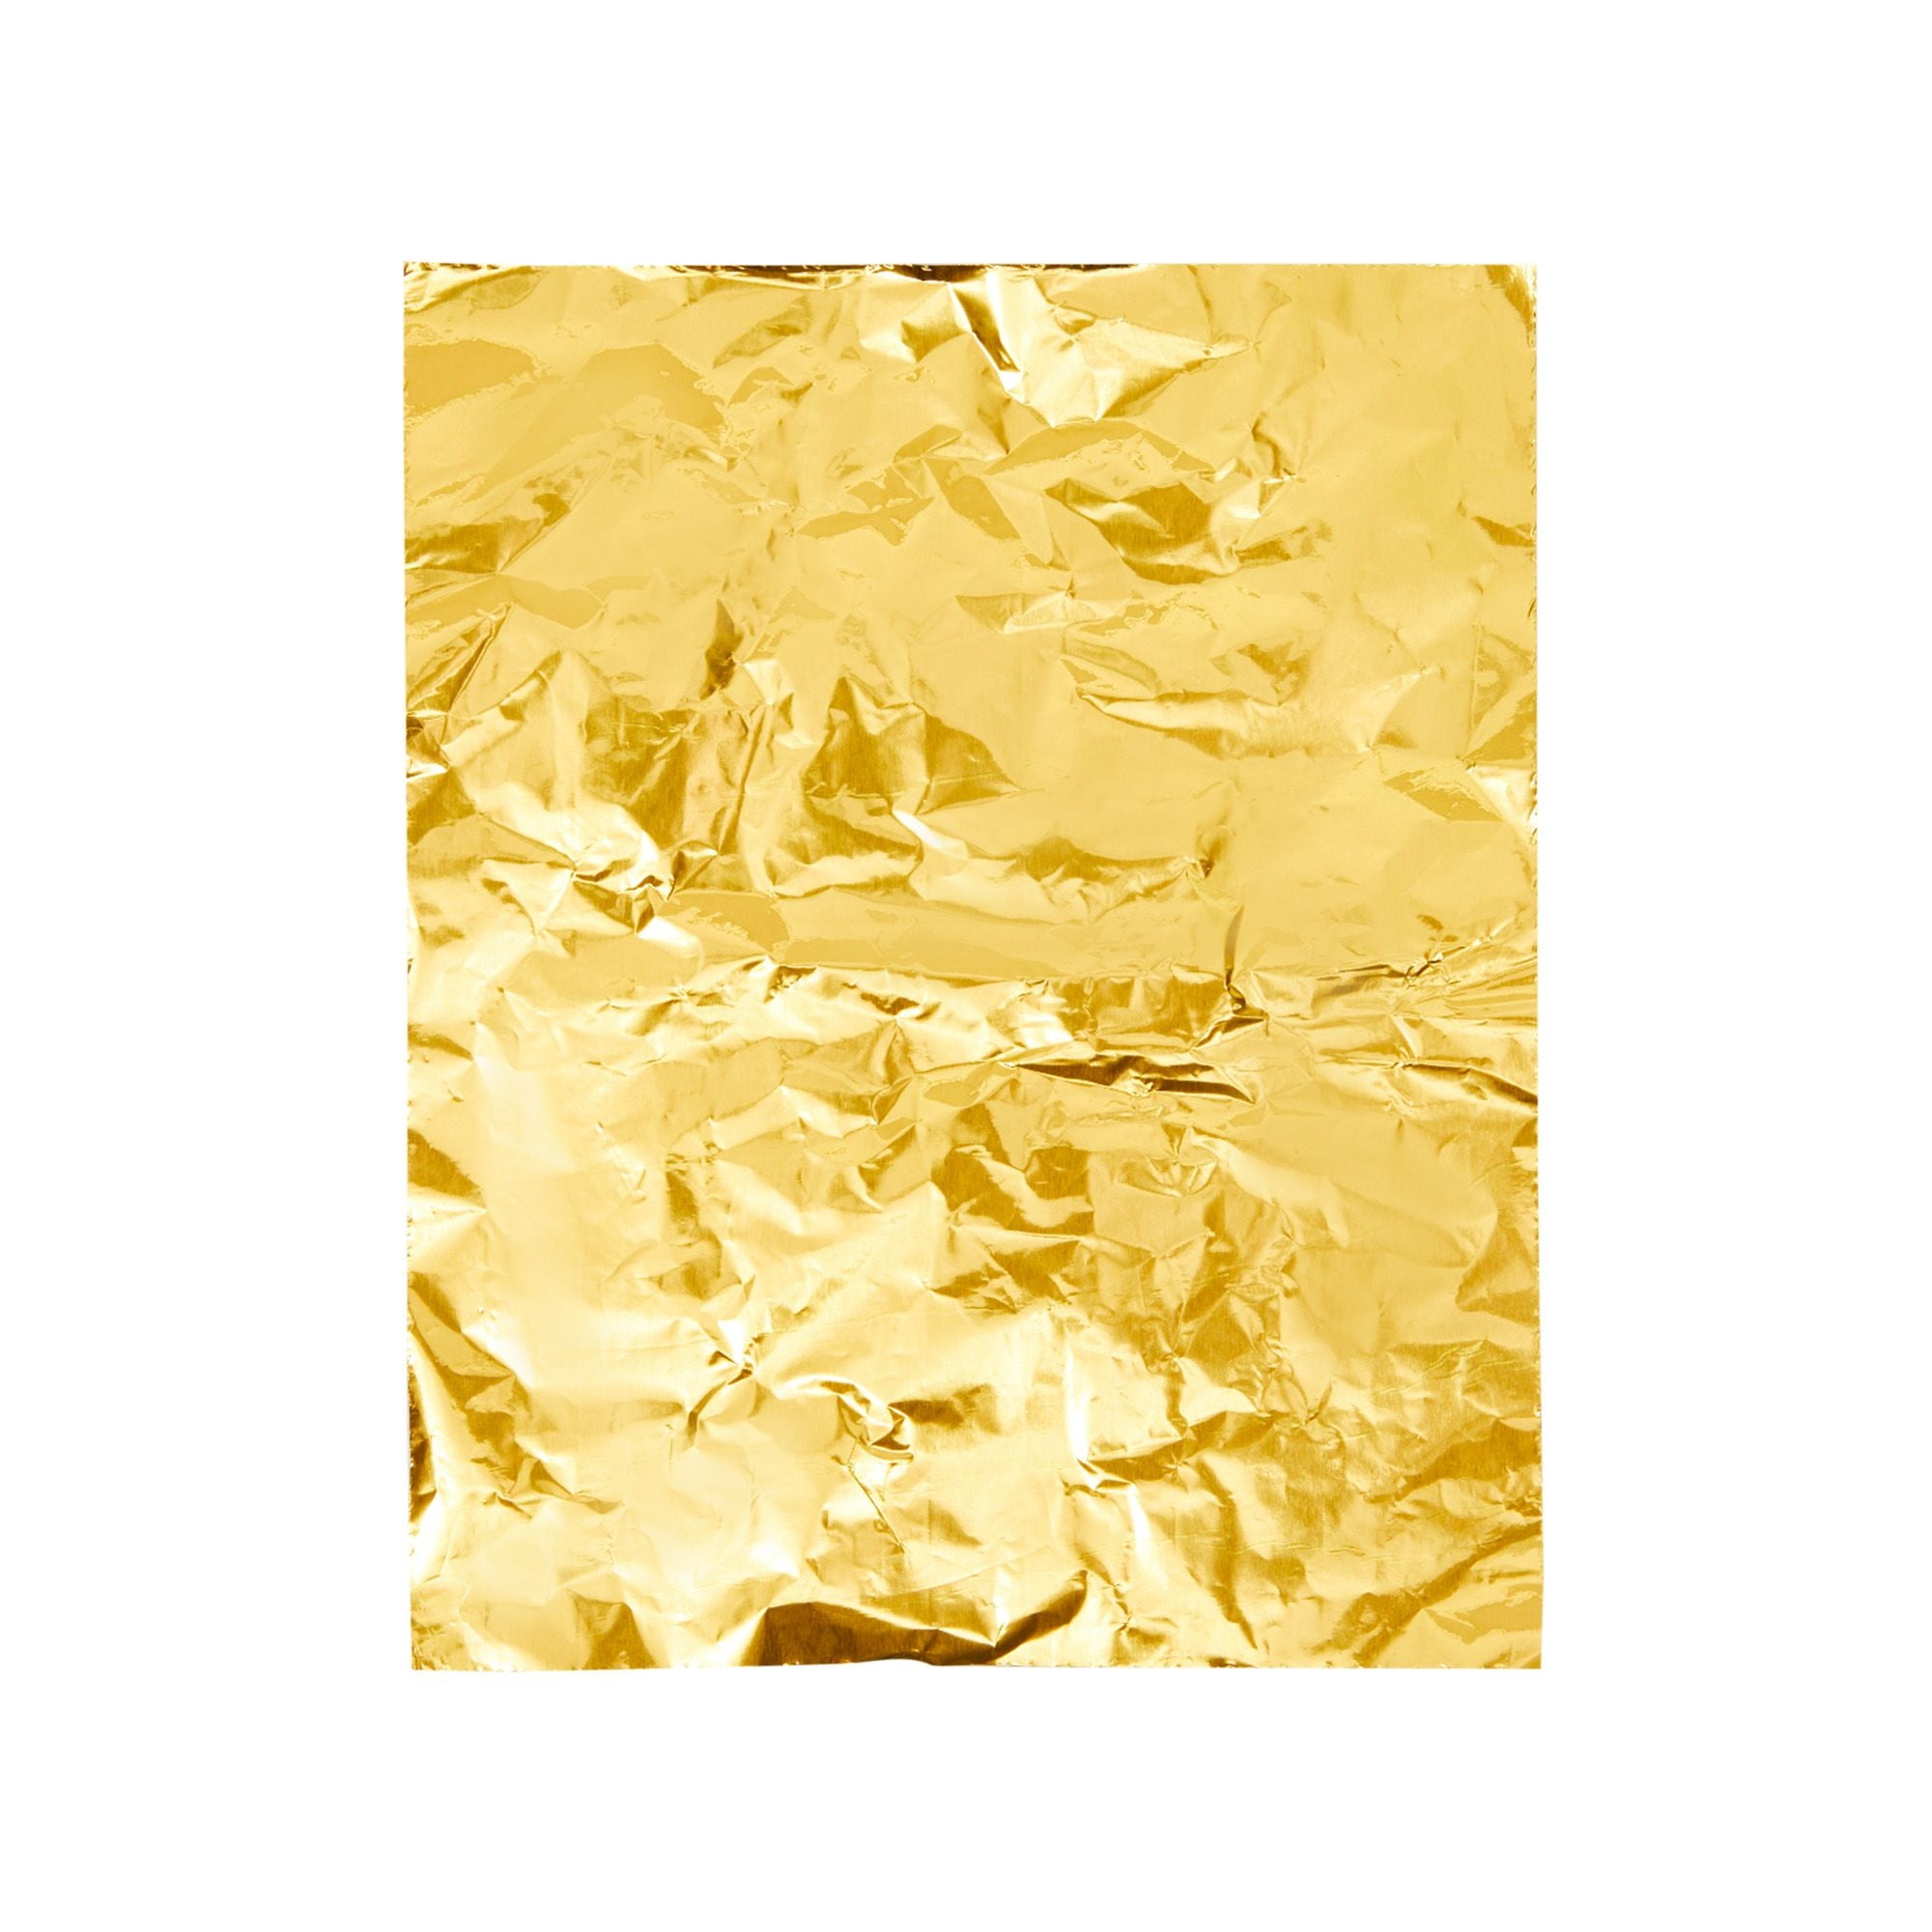 Crown Display Metallic Gold Foil Sheets For Gift Wrapping 100 Sheets I 15  In X 20 In I Gold Foil Sheets For Crafts I Plastic Wrap For Presents I Gift